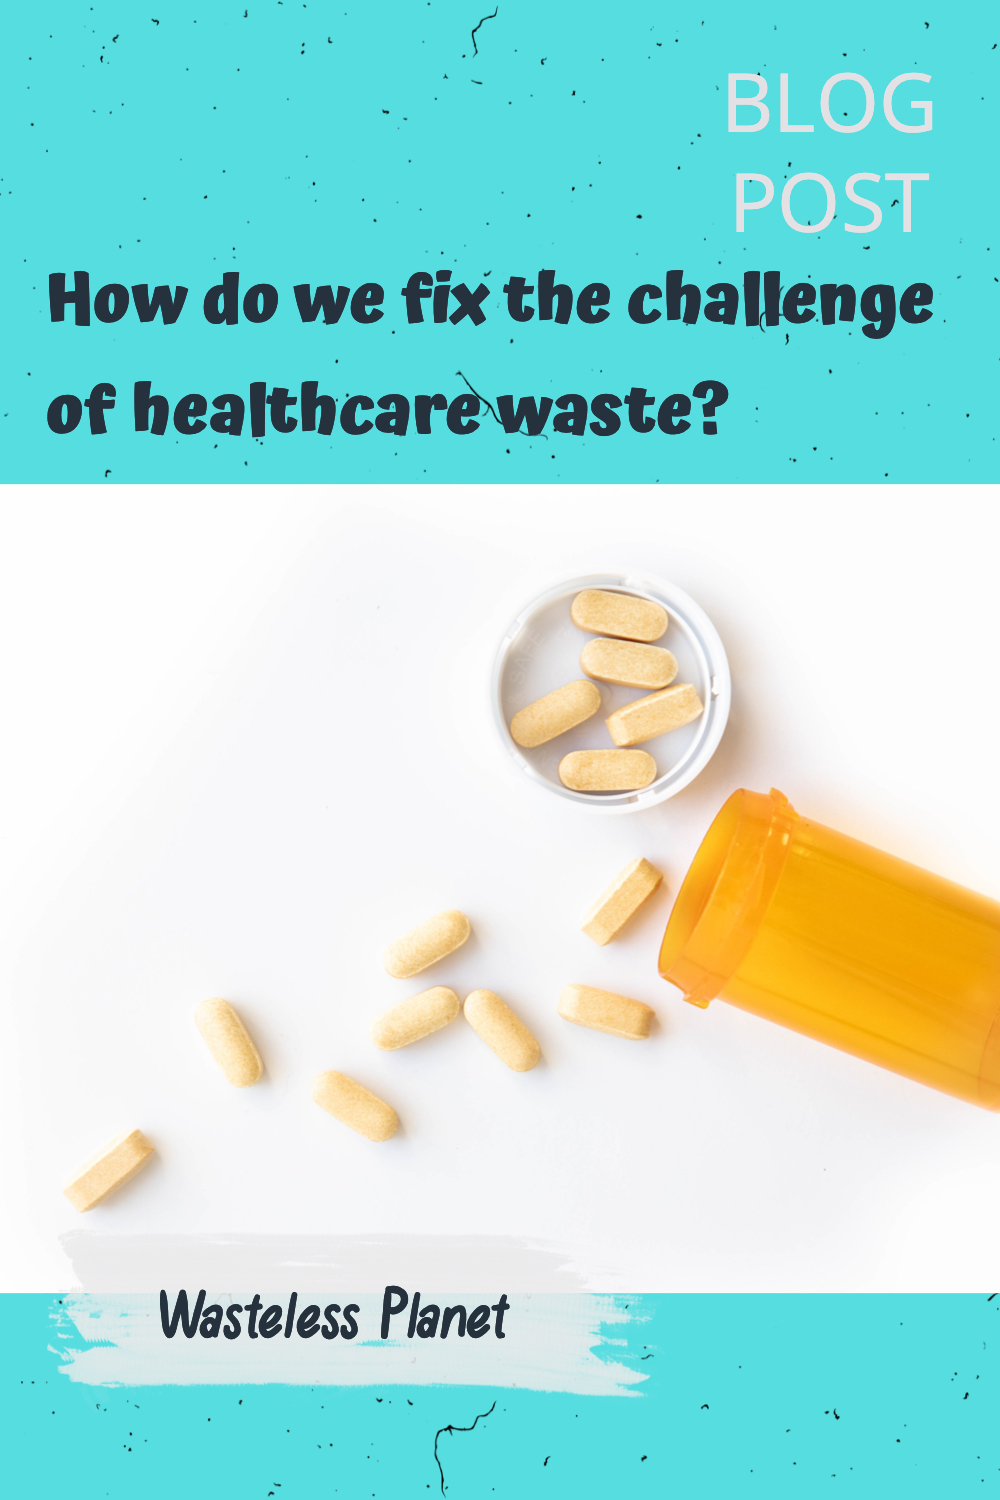 How do we fix the challenge of healthcare waste?